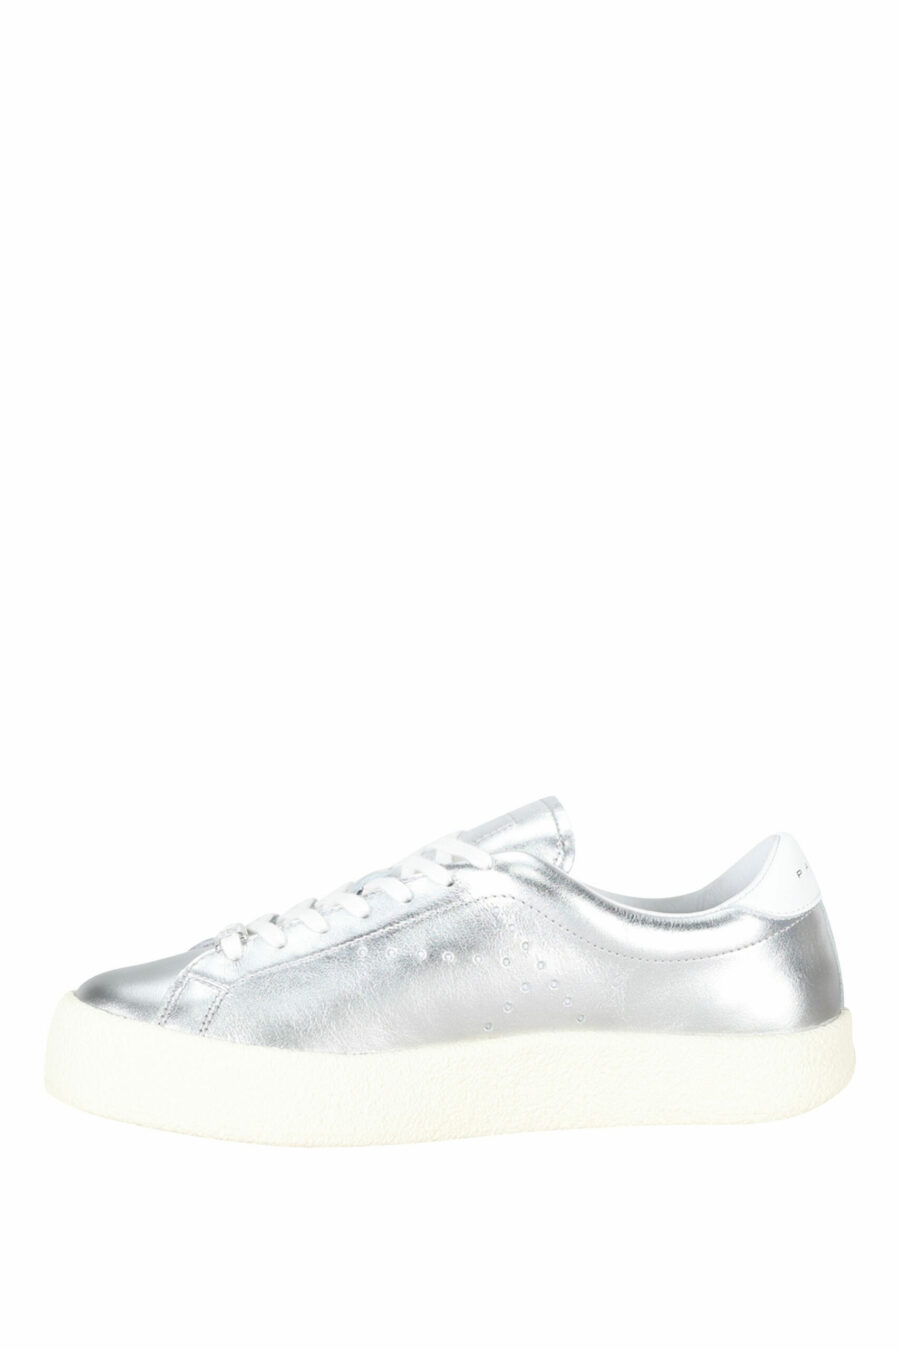 Silver shoes with black mini-logo - 3612230556461 2 scaled